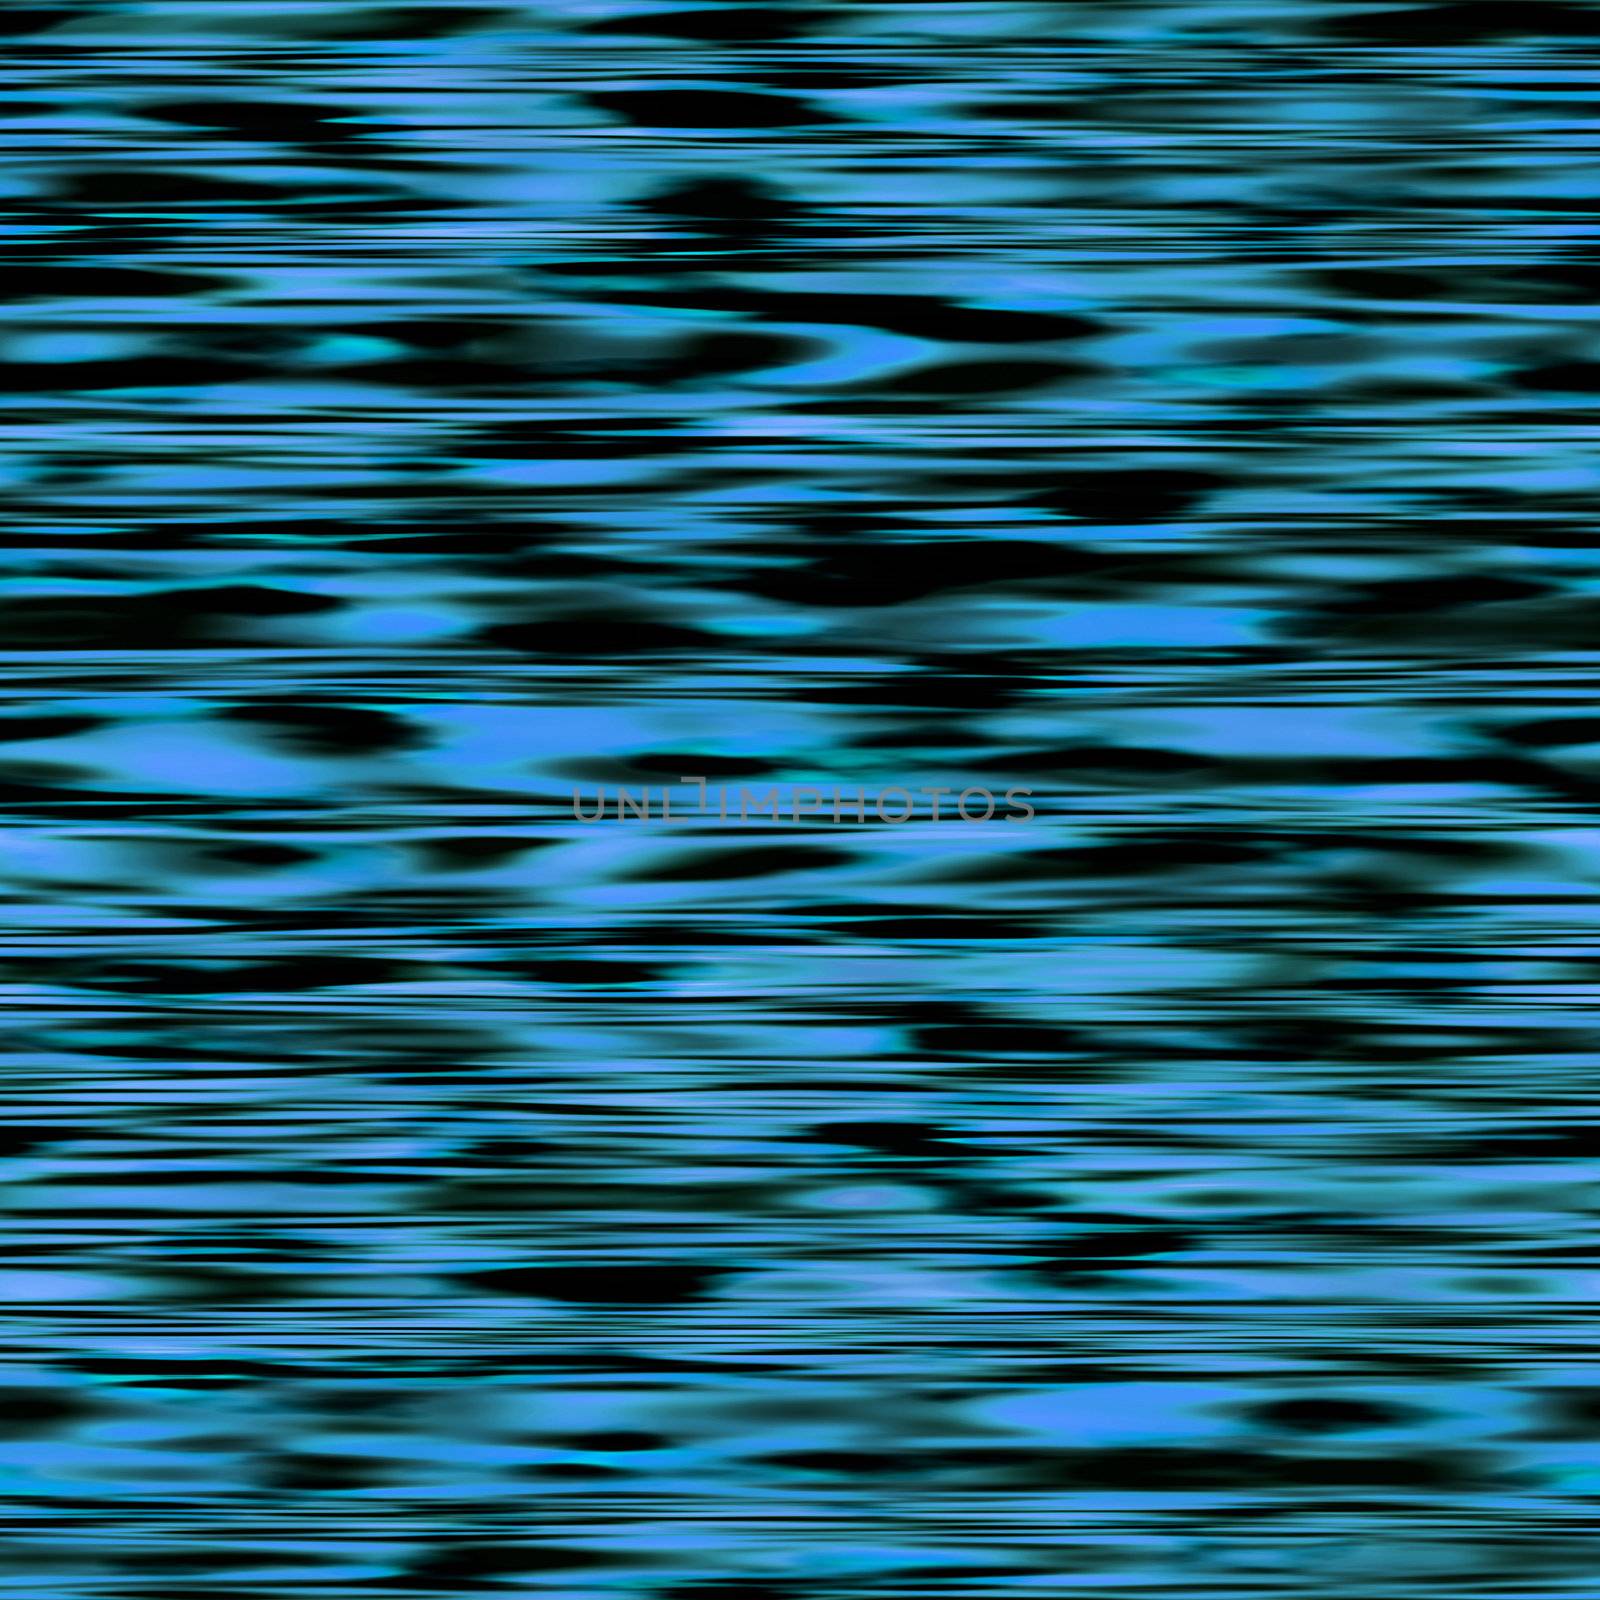 elegant dark blue ripples background, would make a good health and/ or wellness related background, tiles also seamlessly as a patttern